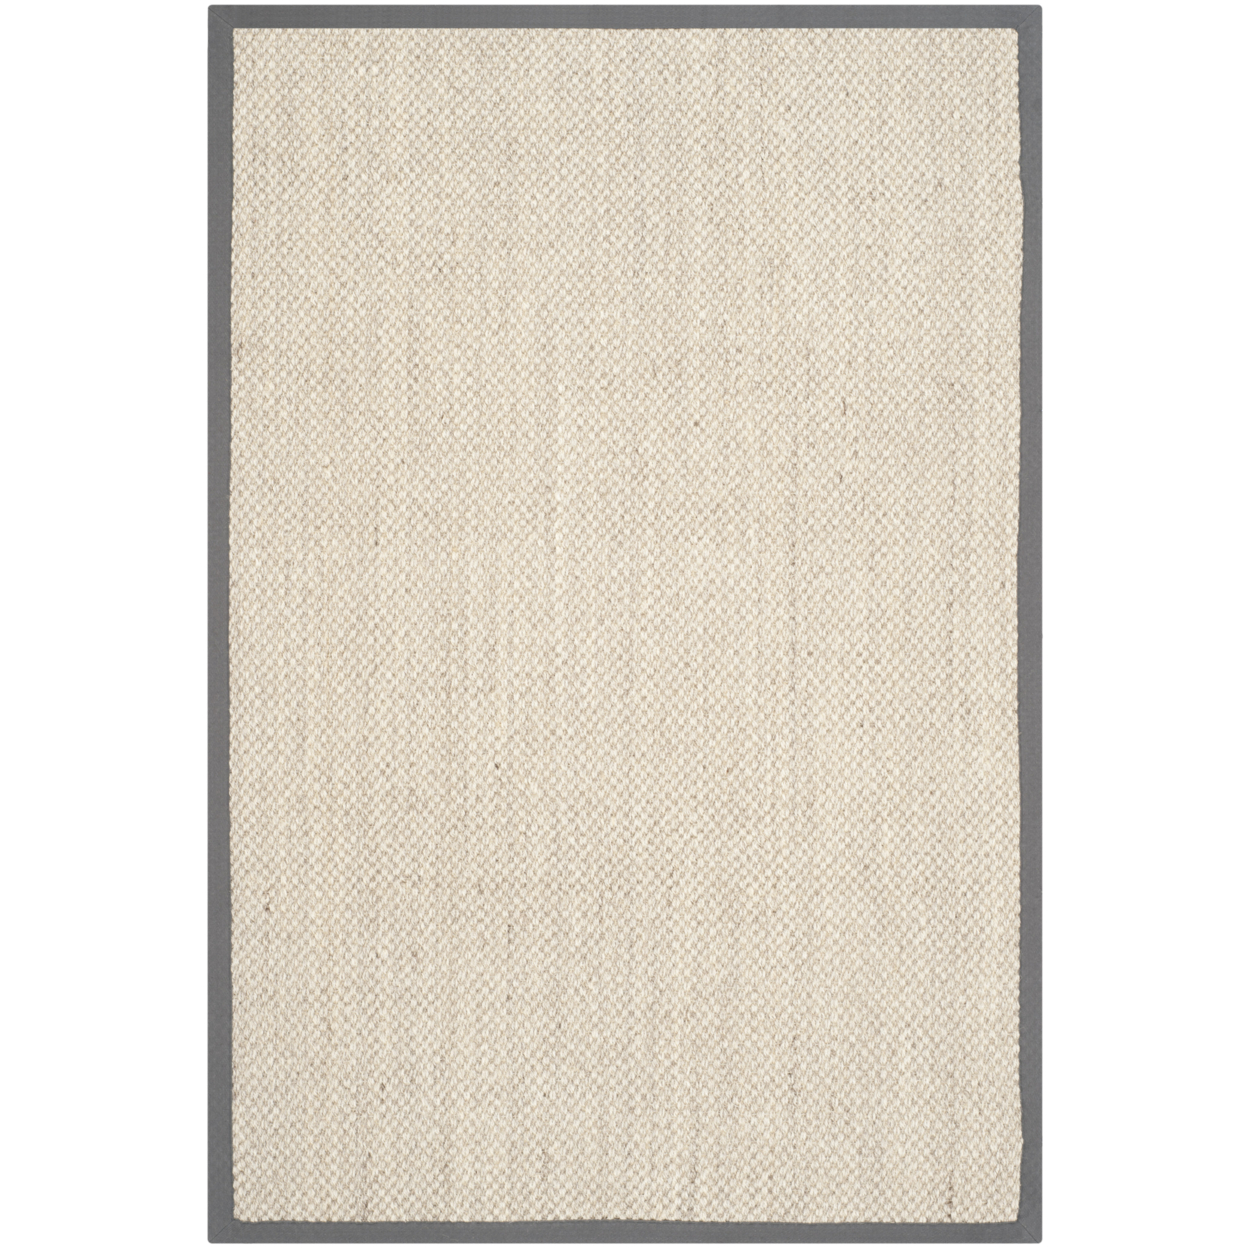 SAFAVIEH Natural Fiber Collection NF443B Marble/Grey Rug - 3' X 5'